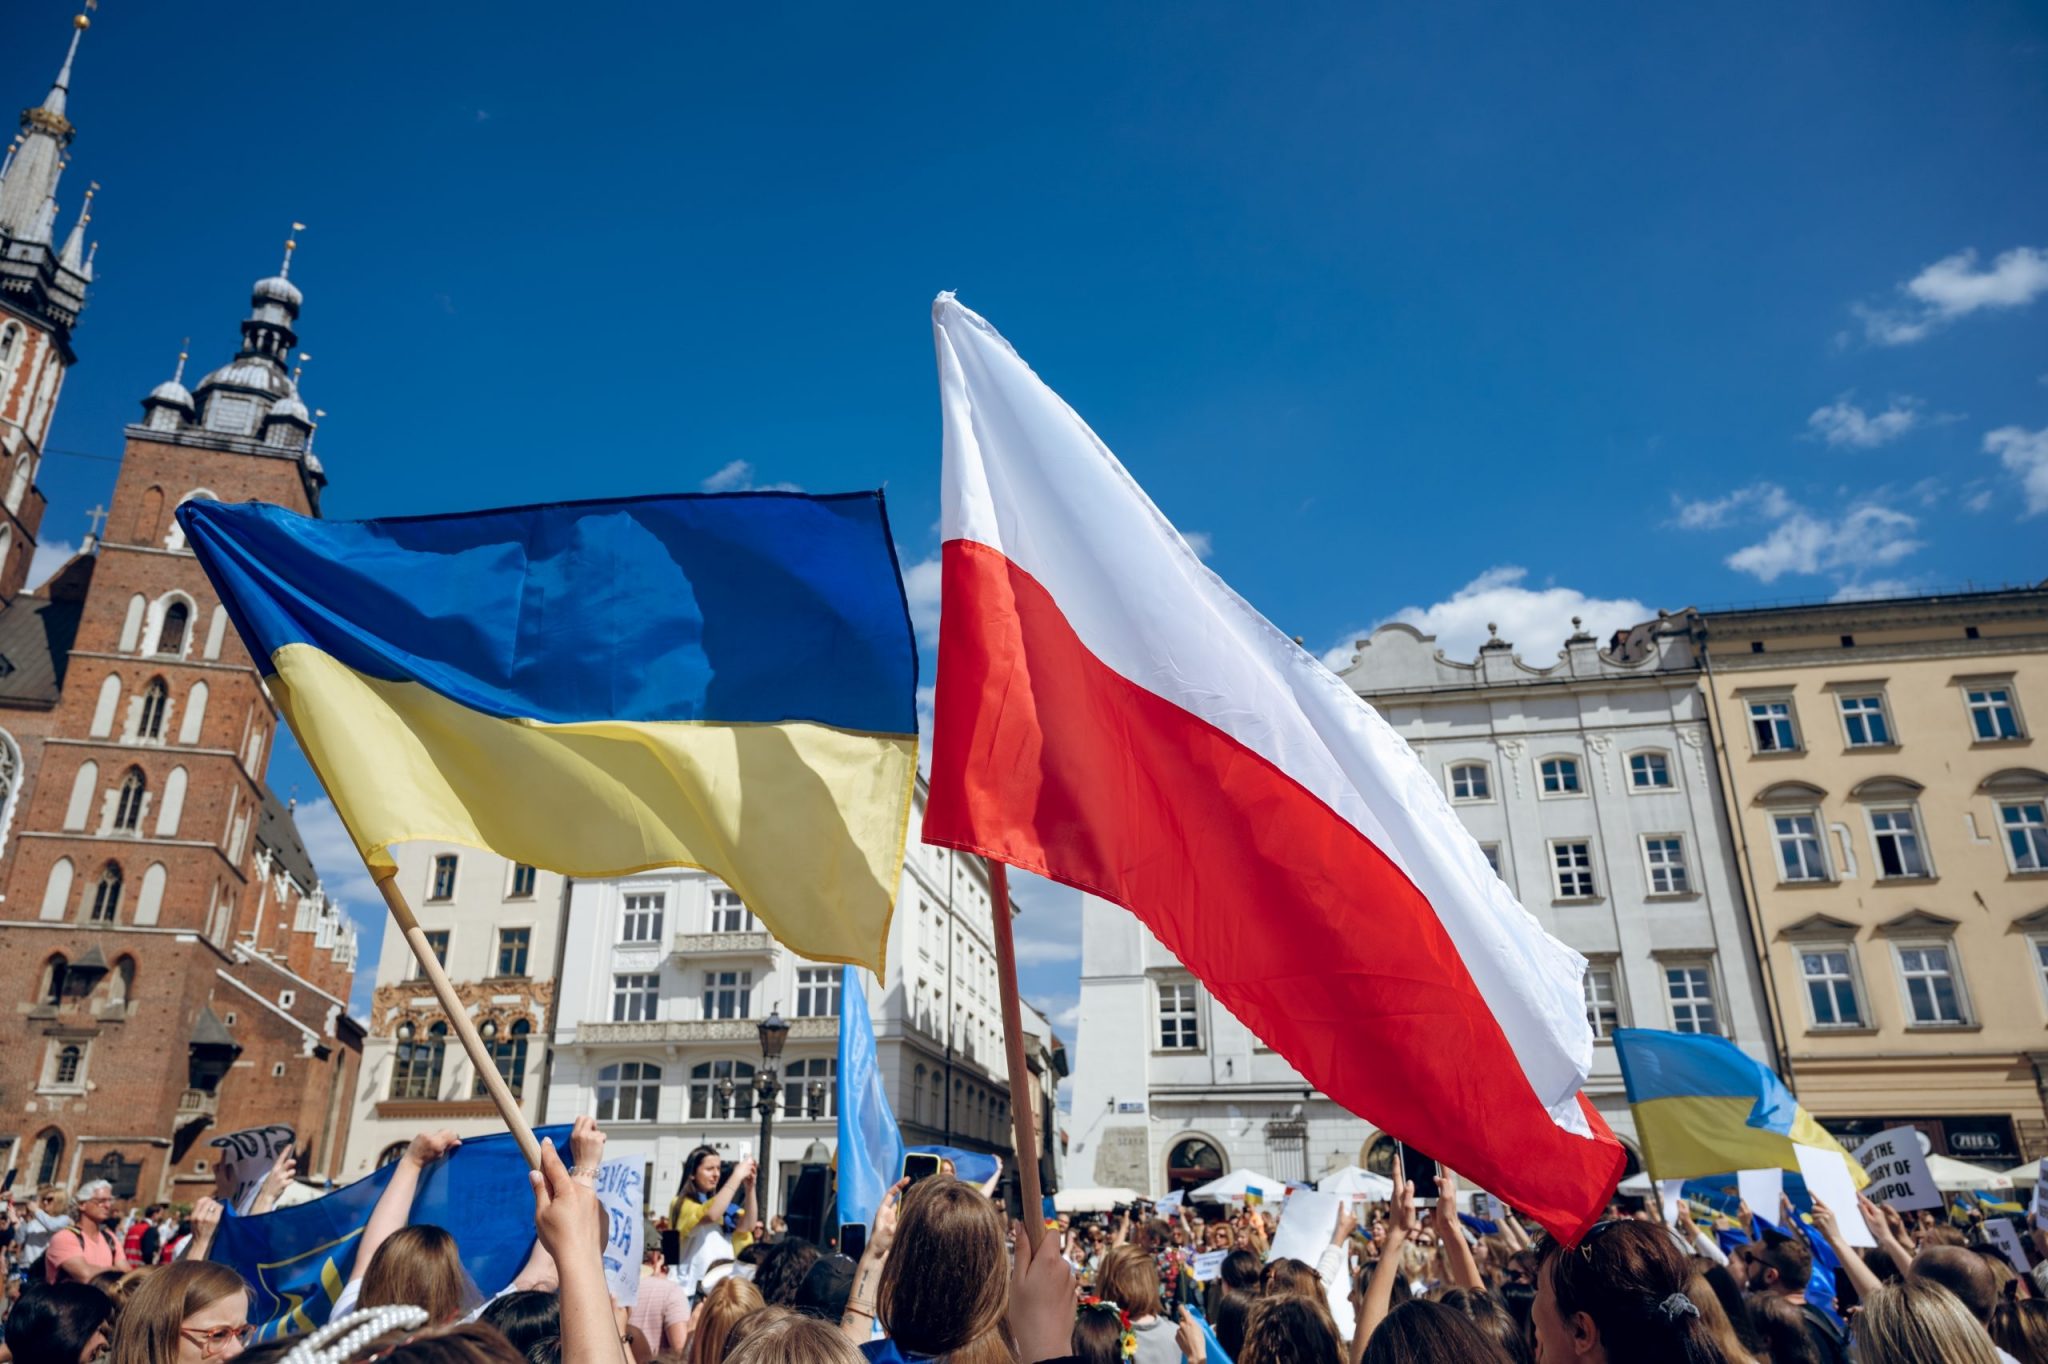 CRAKOW. POLAND. May 15, 2022 Rally in Poland in support of Ukraine